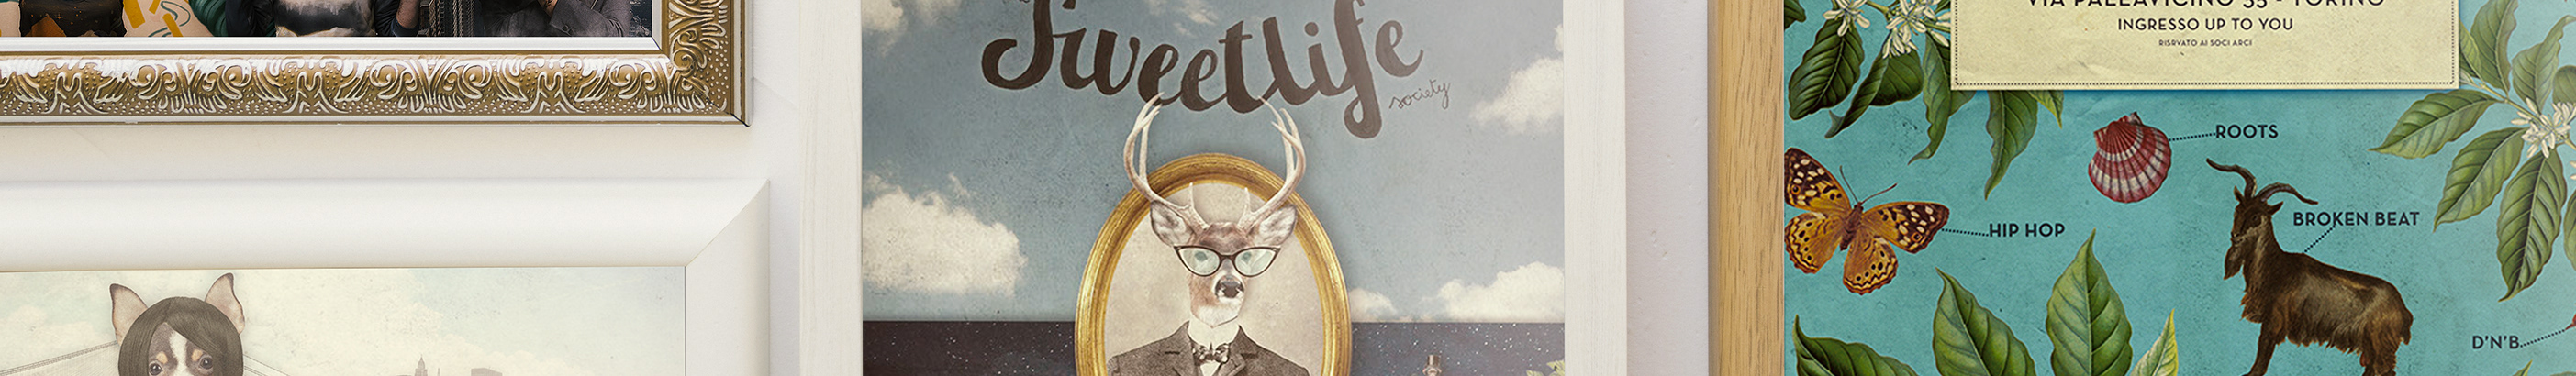 The Sweet Life Faktory's profile banner